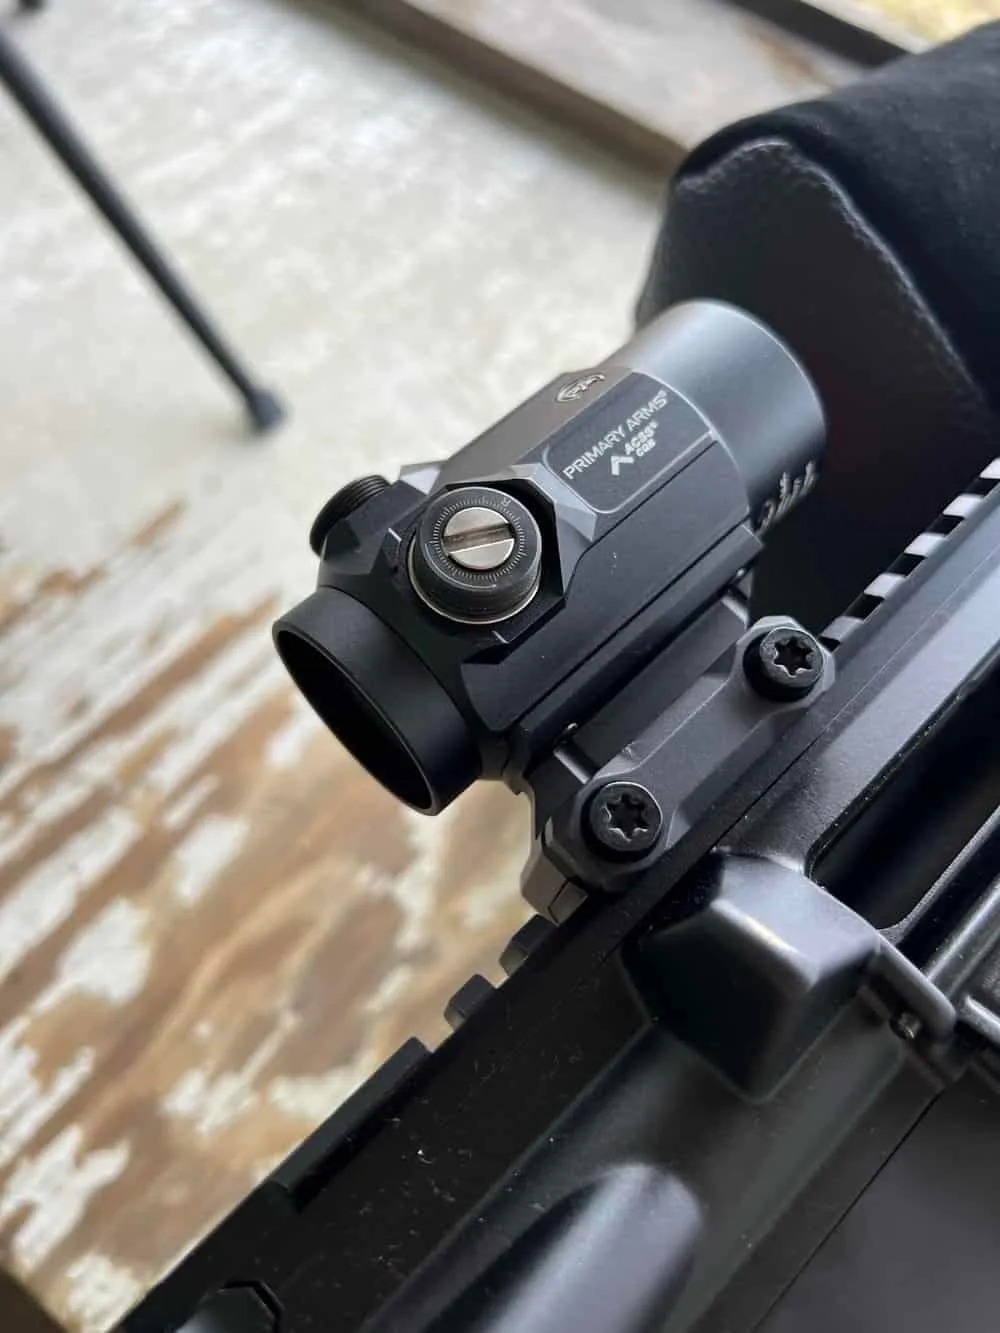 Primary Arms SLx Microdot 25 Gen 2 mounted on ar pistol controls